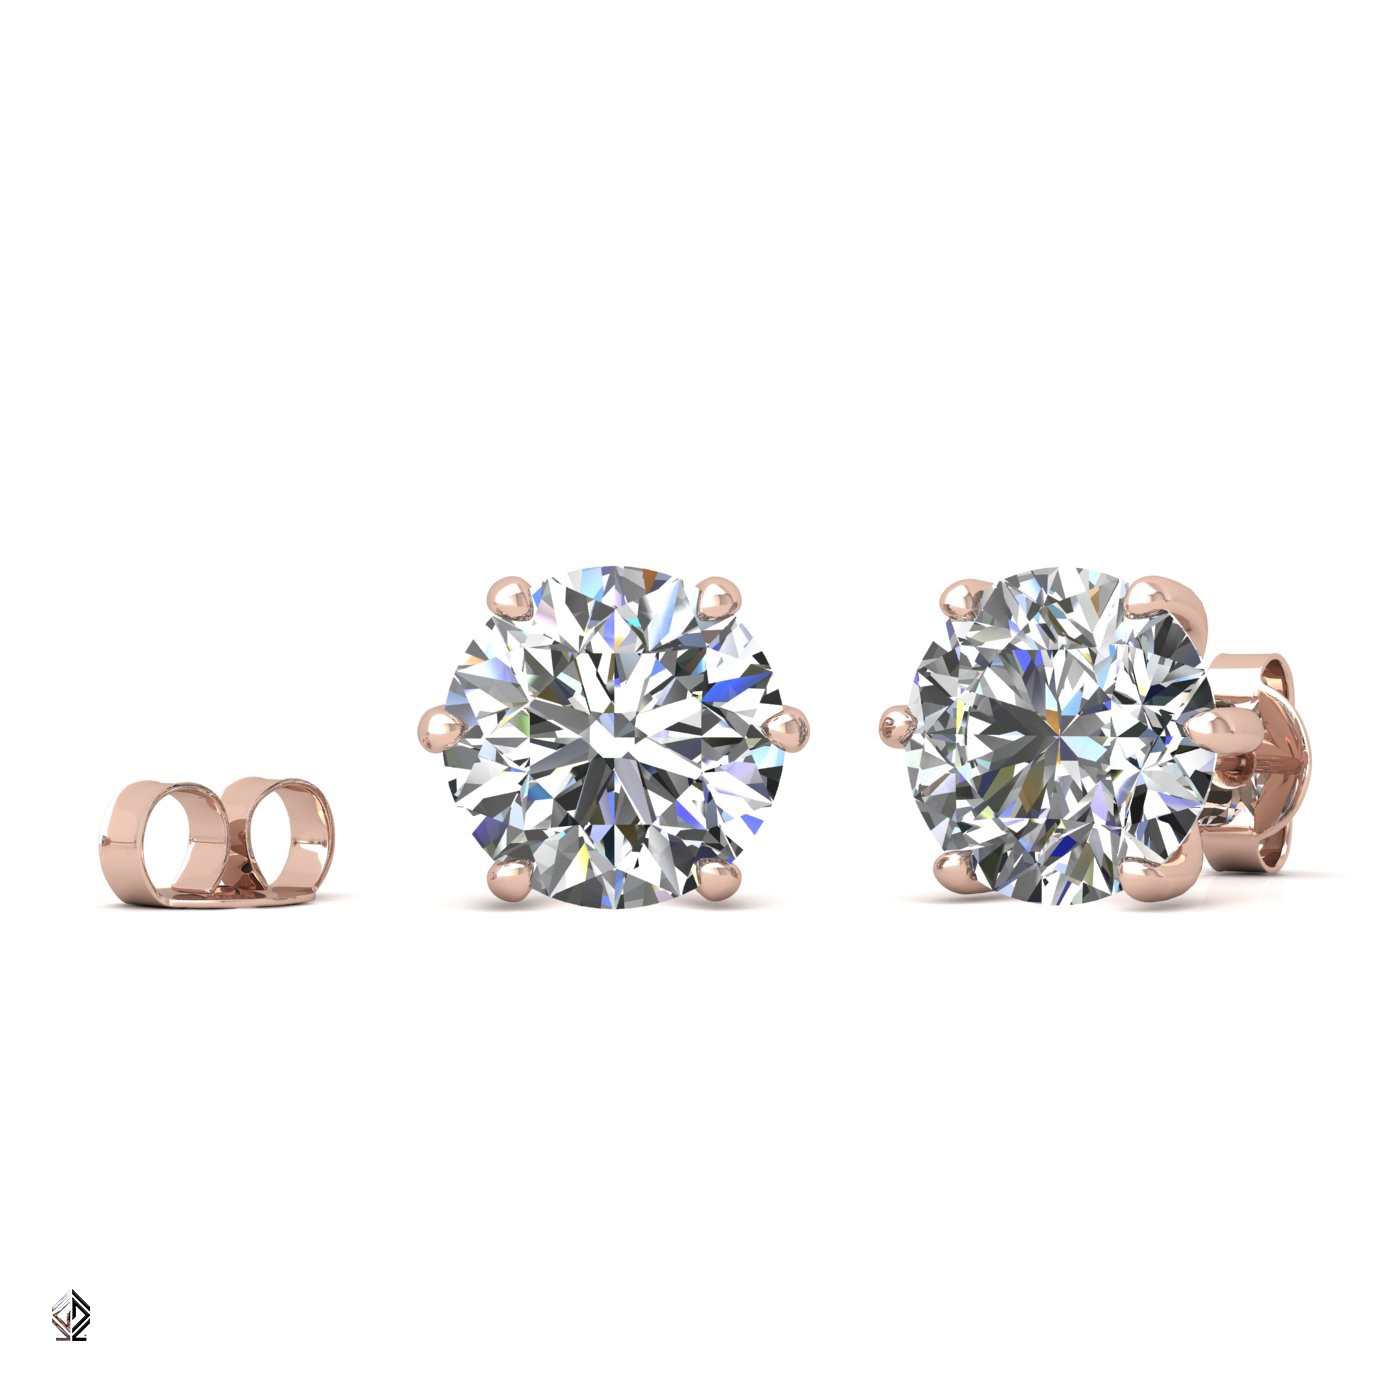 18k rose gold 1.2 ct each (2,4 tcw) 6 prongs round shape diamond earrings Photos & images